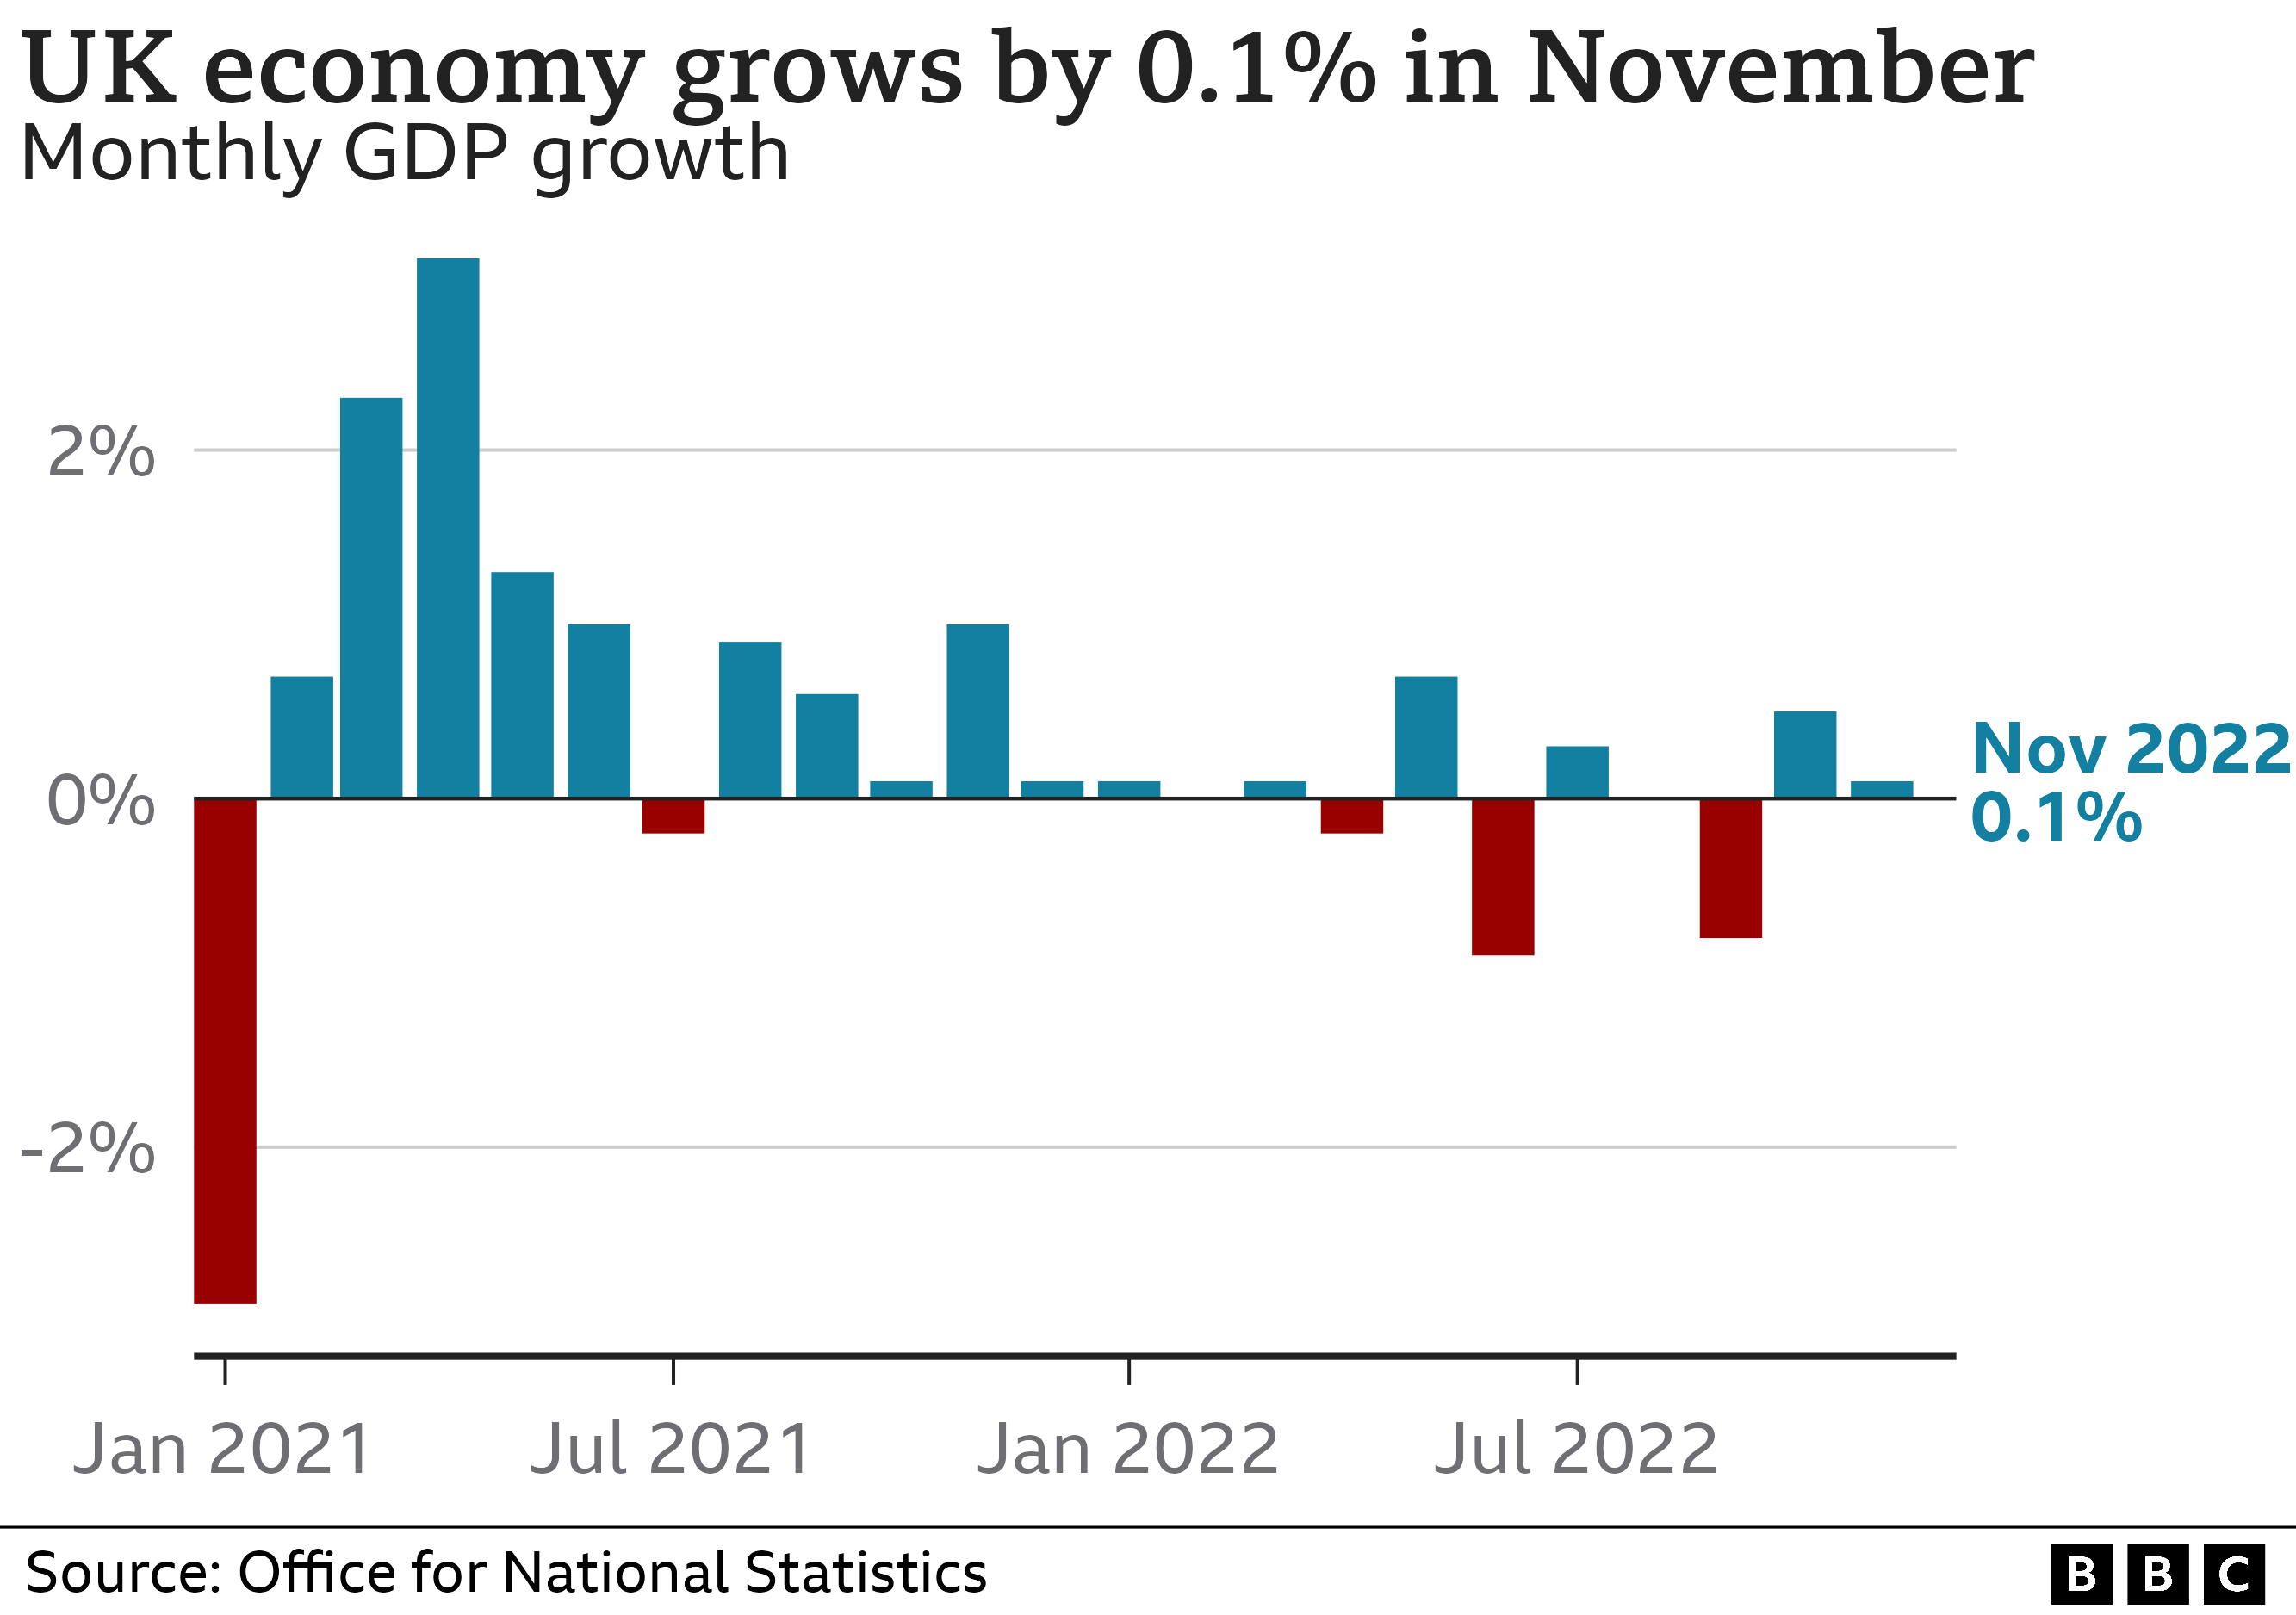 Chart showing GDP growth at 0.1% in November 2022